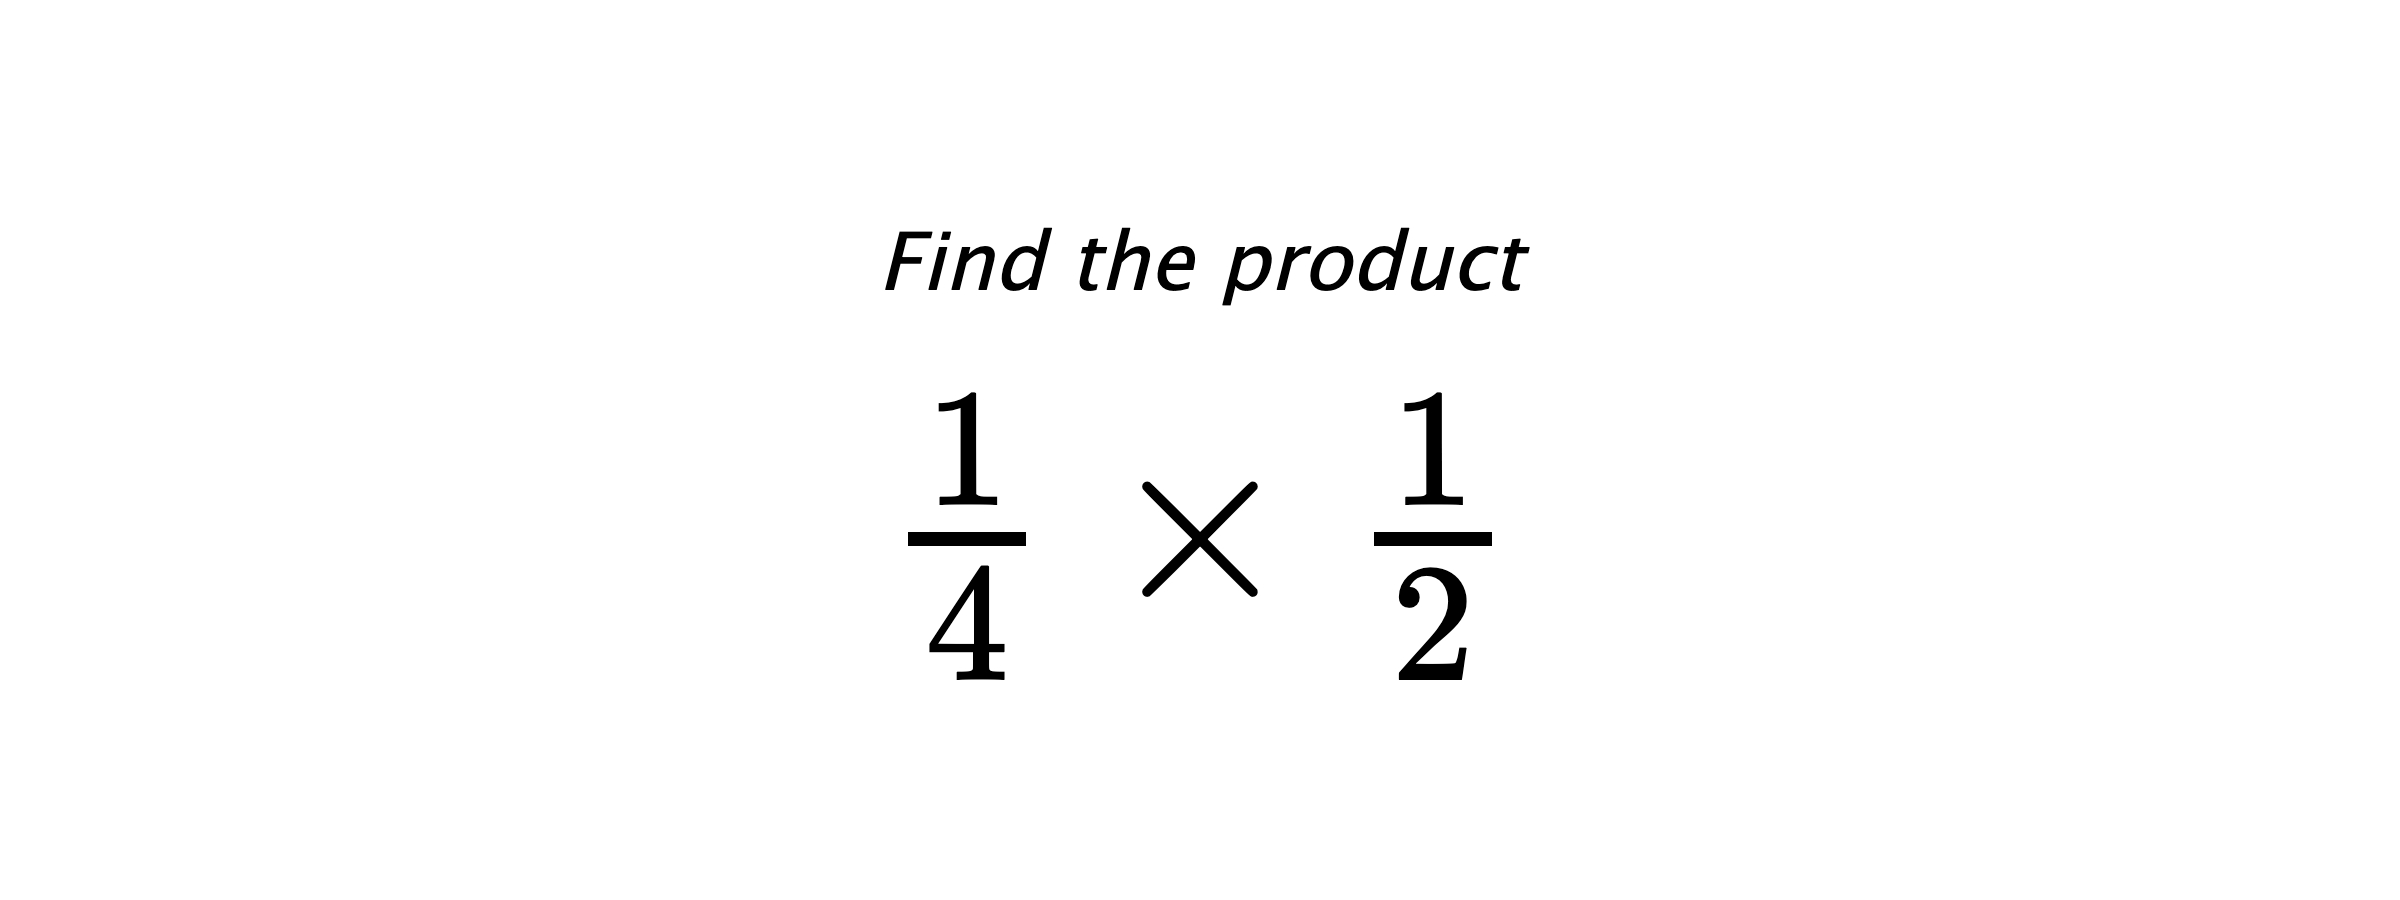 Find the product $ \frac{1}{4} \times \frac{1}{2} $